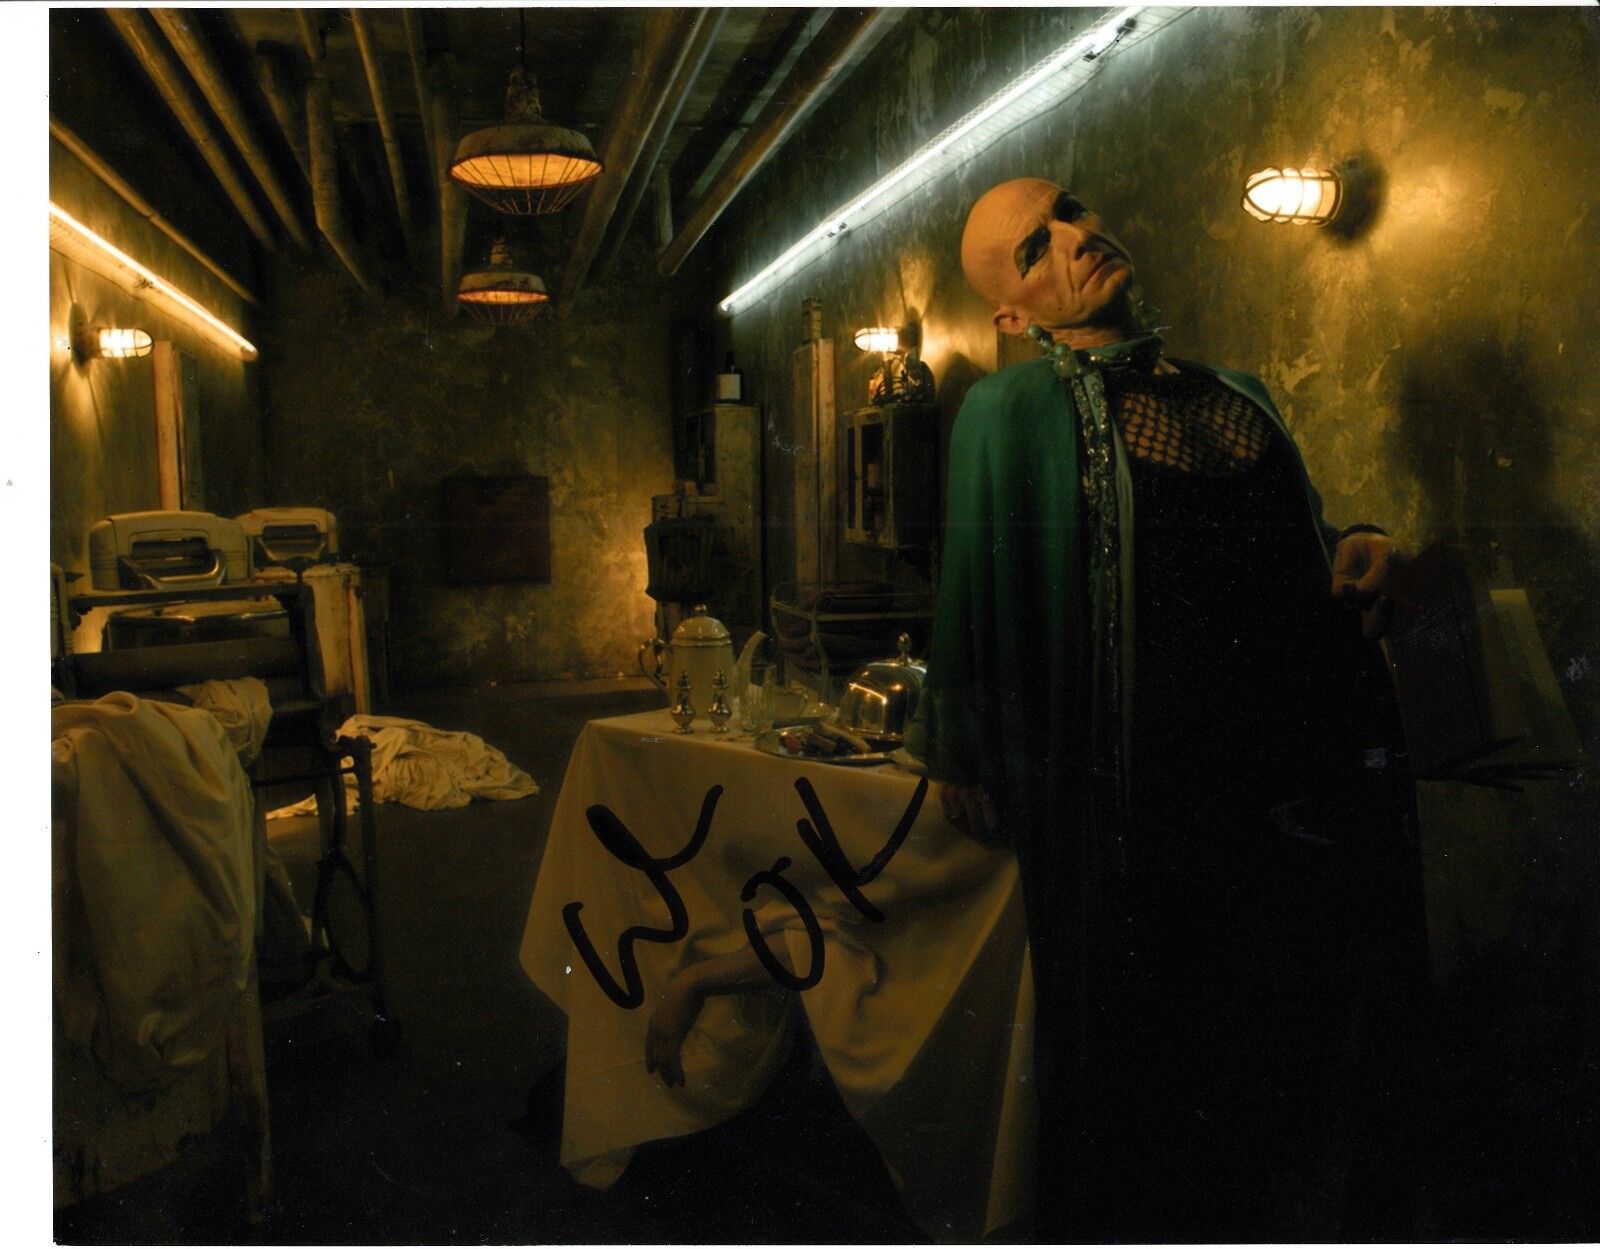 DENIS O'HARE SIGNED AMERICAN HORROR STORY Photo Poster painting UACC REG 242 (5)